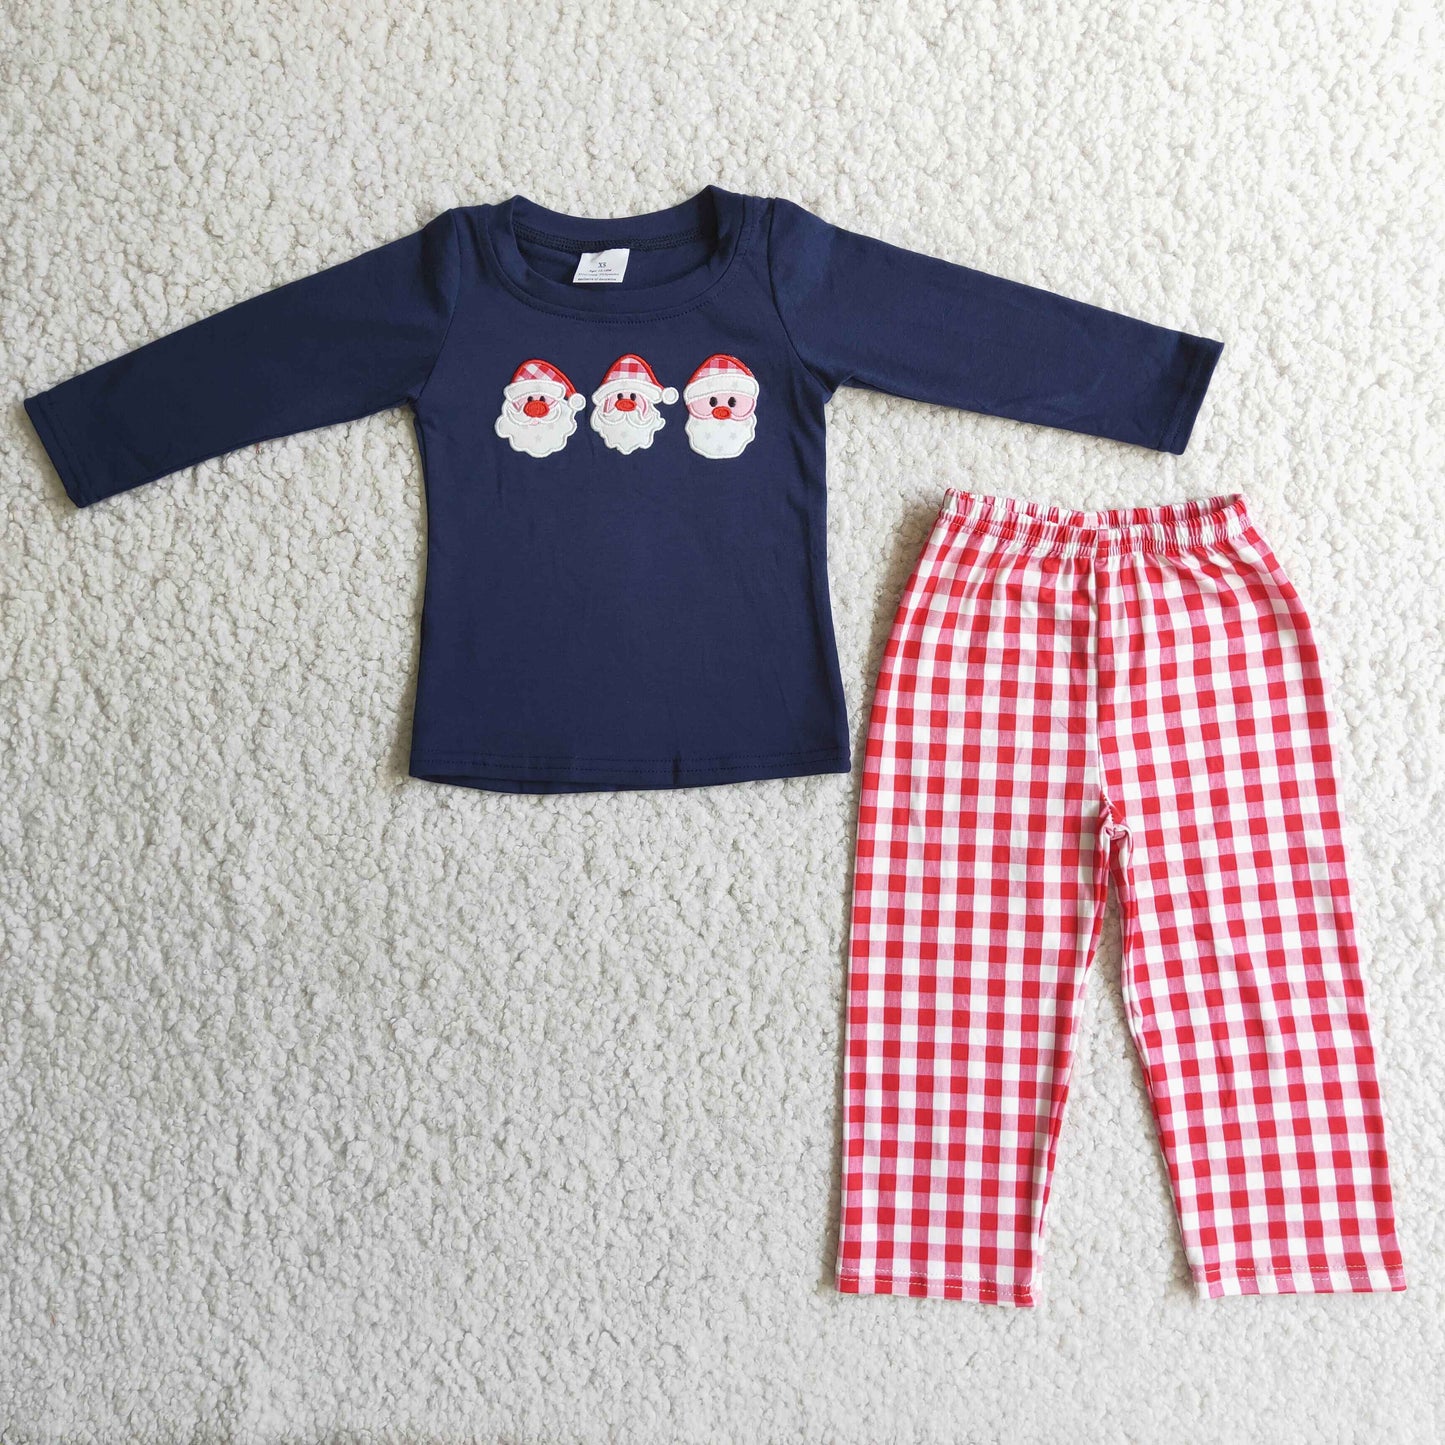 Santa Claus Embroidery Red Plaid Pants Set boys christmas outfit